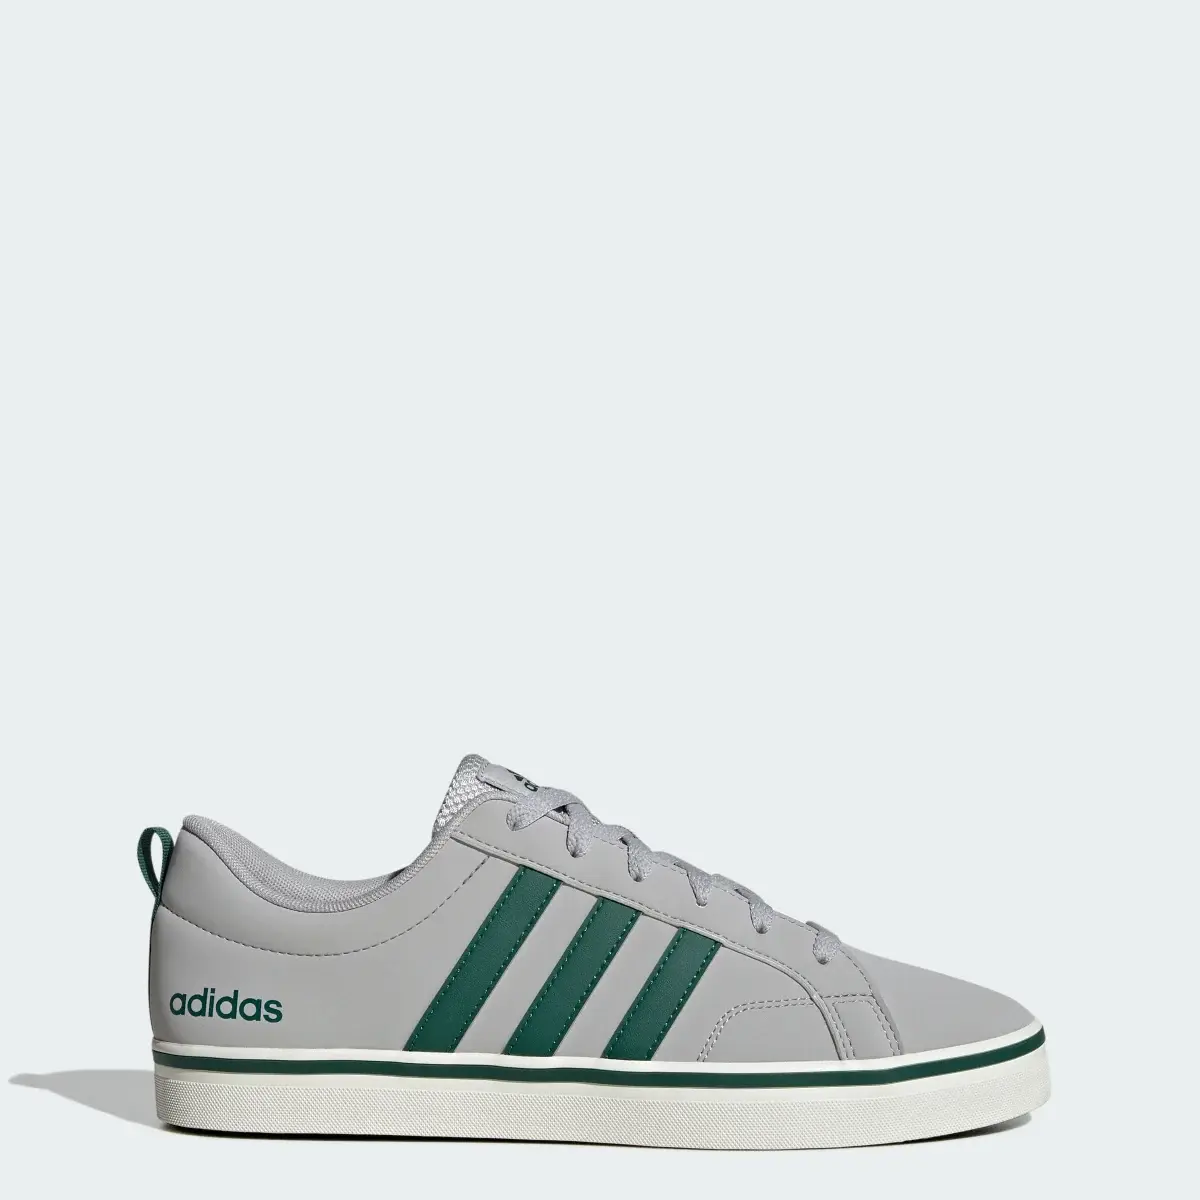 Adidas VS Pace 2.0 Lifestyle Skateboarding Shoes. 1